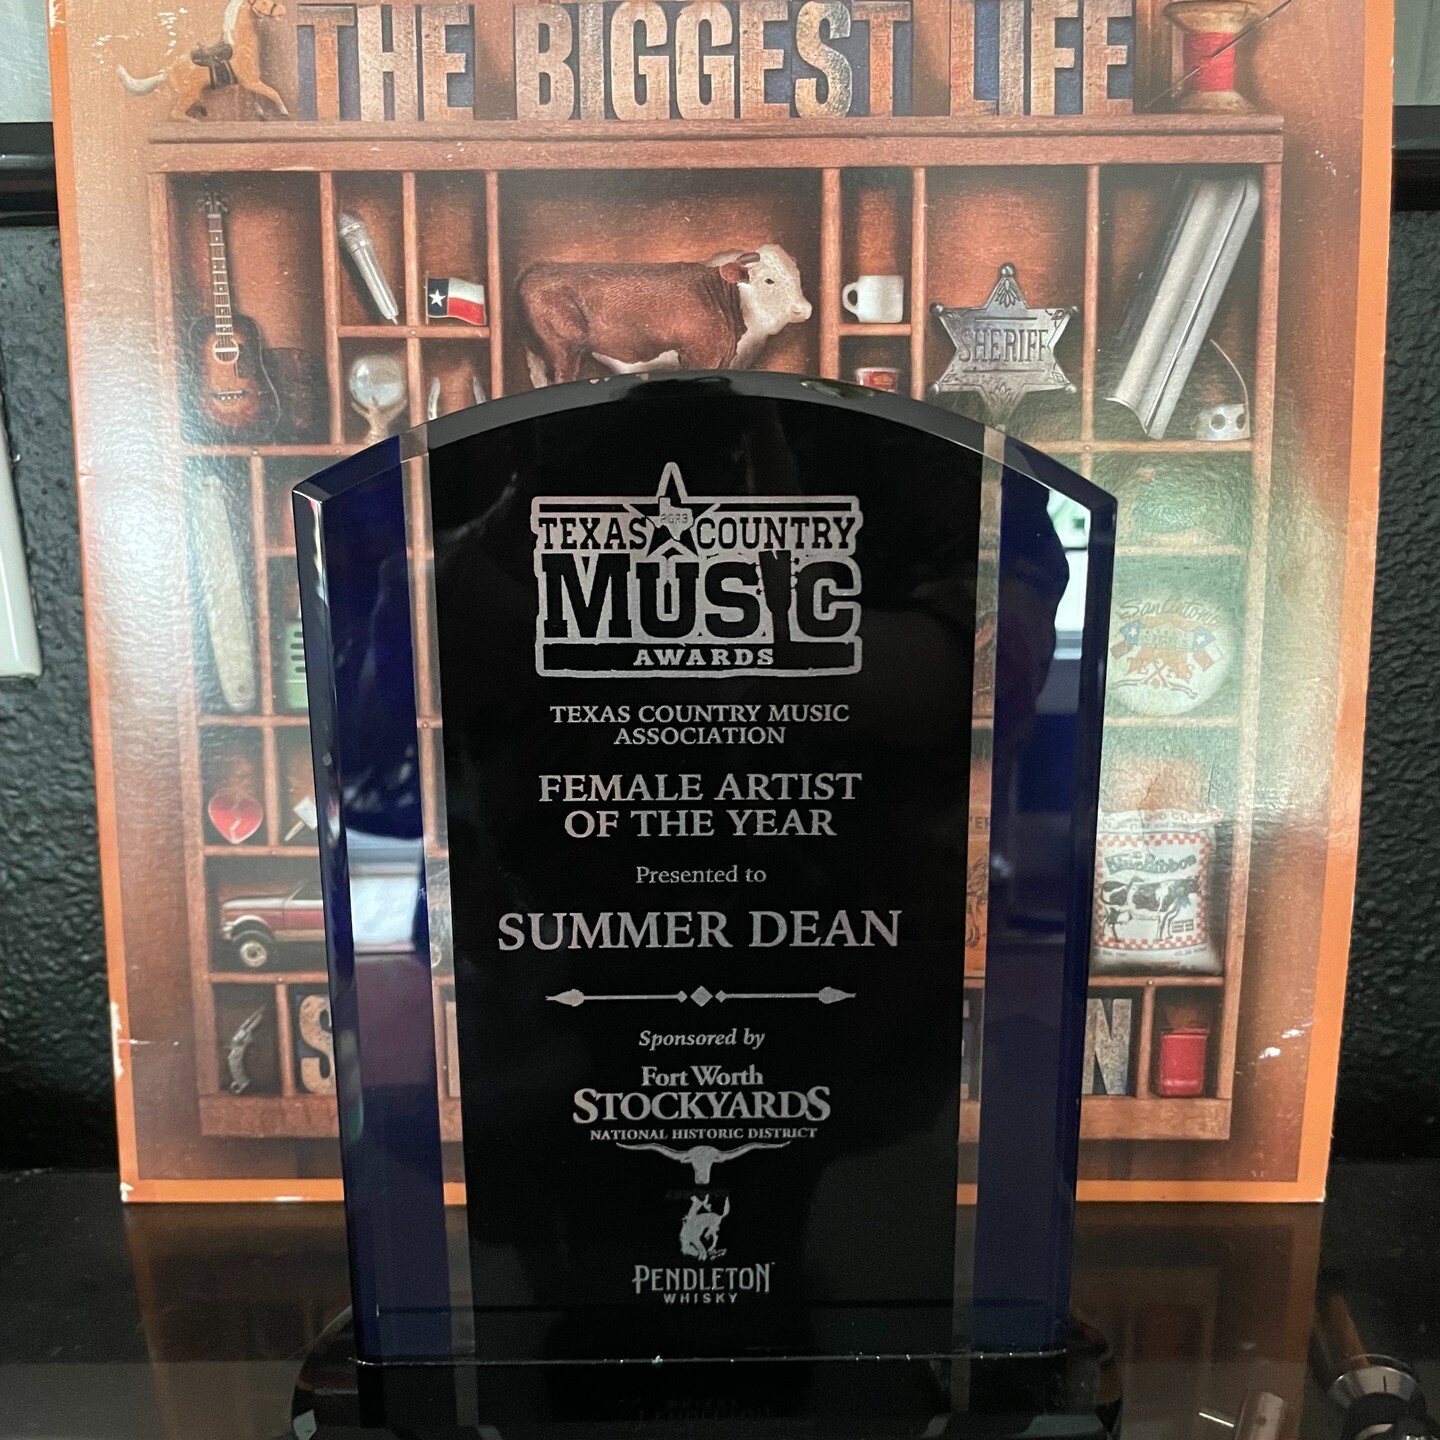 Congrats to the award-winning @summerdean who took home Female Artist of the Year at the Texas Country Music Awards!

We recommend putting on her album 'The Biggest Life' to celebrate!